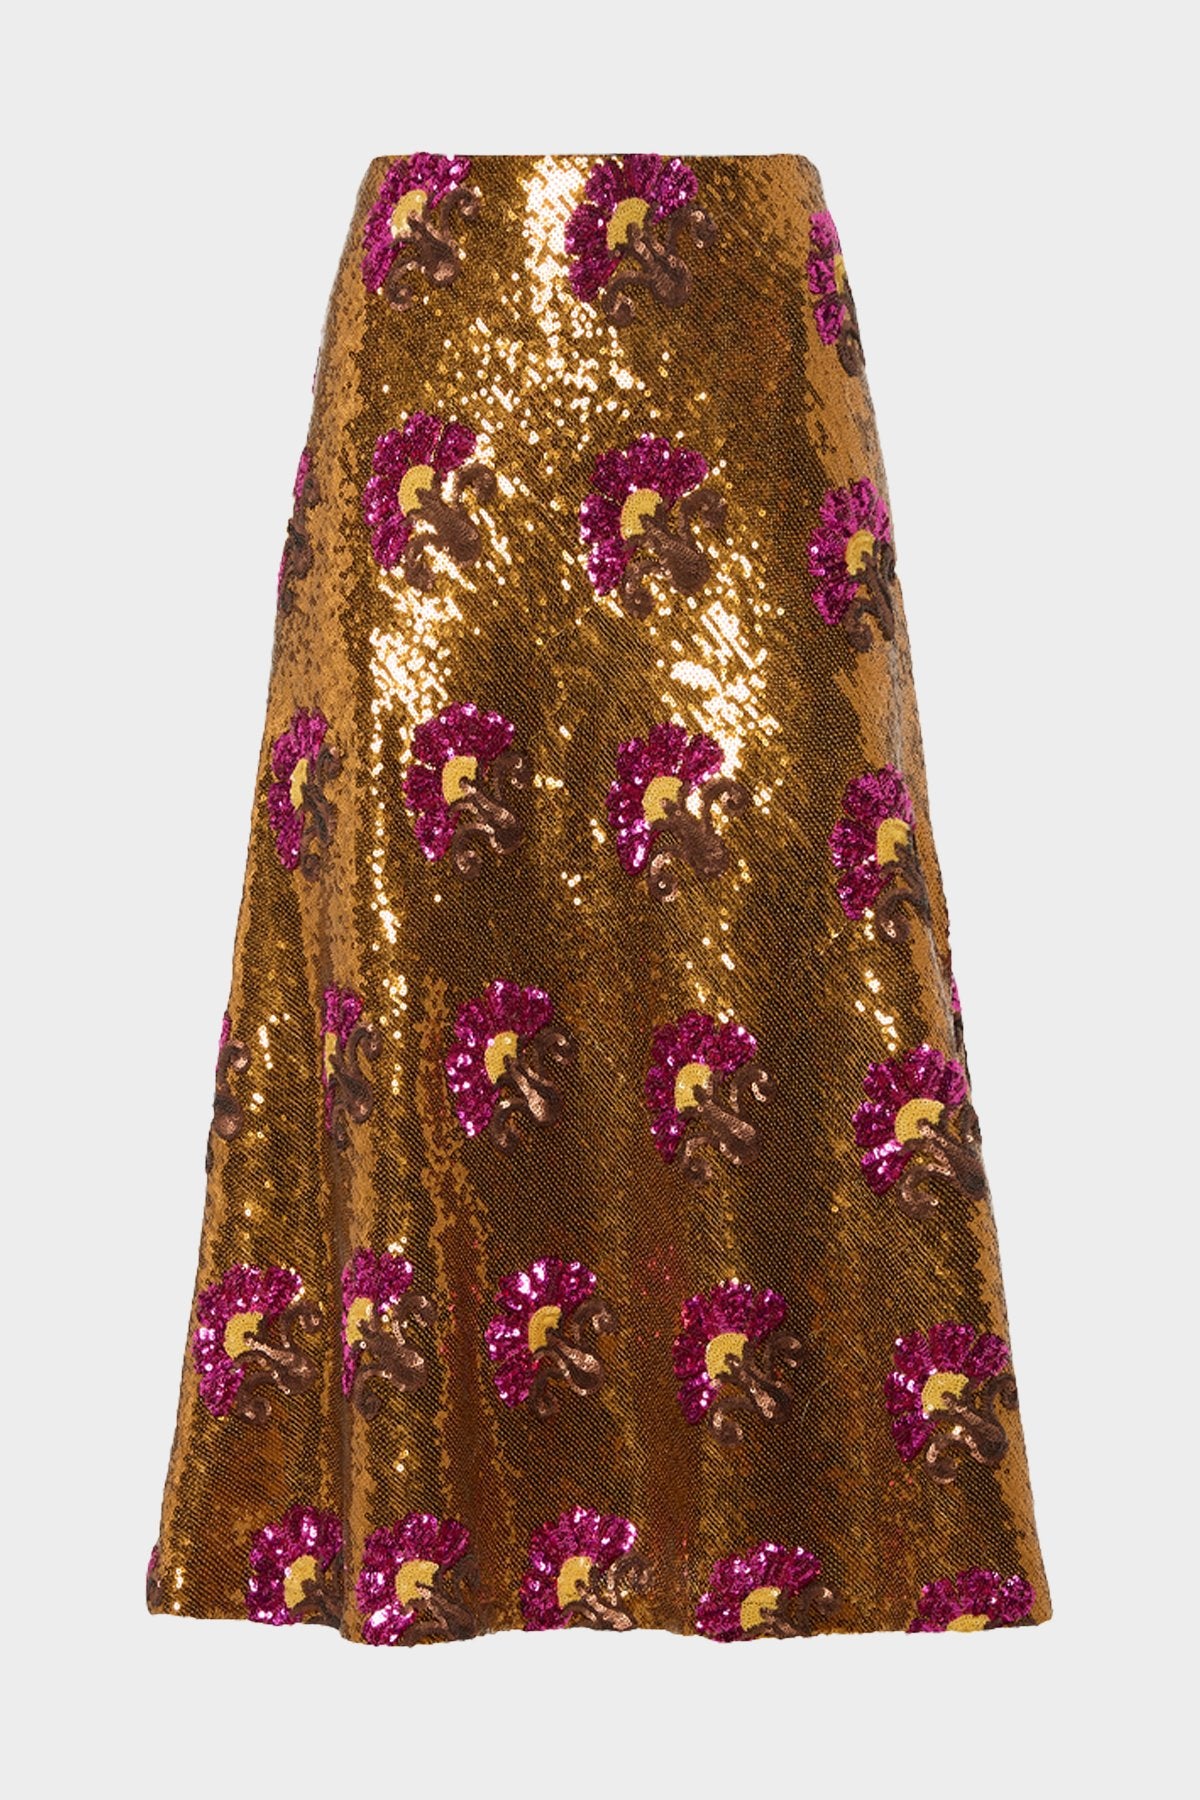 Holly Skirt in Textured Sequins - shop-olivia.com